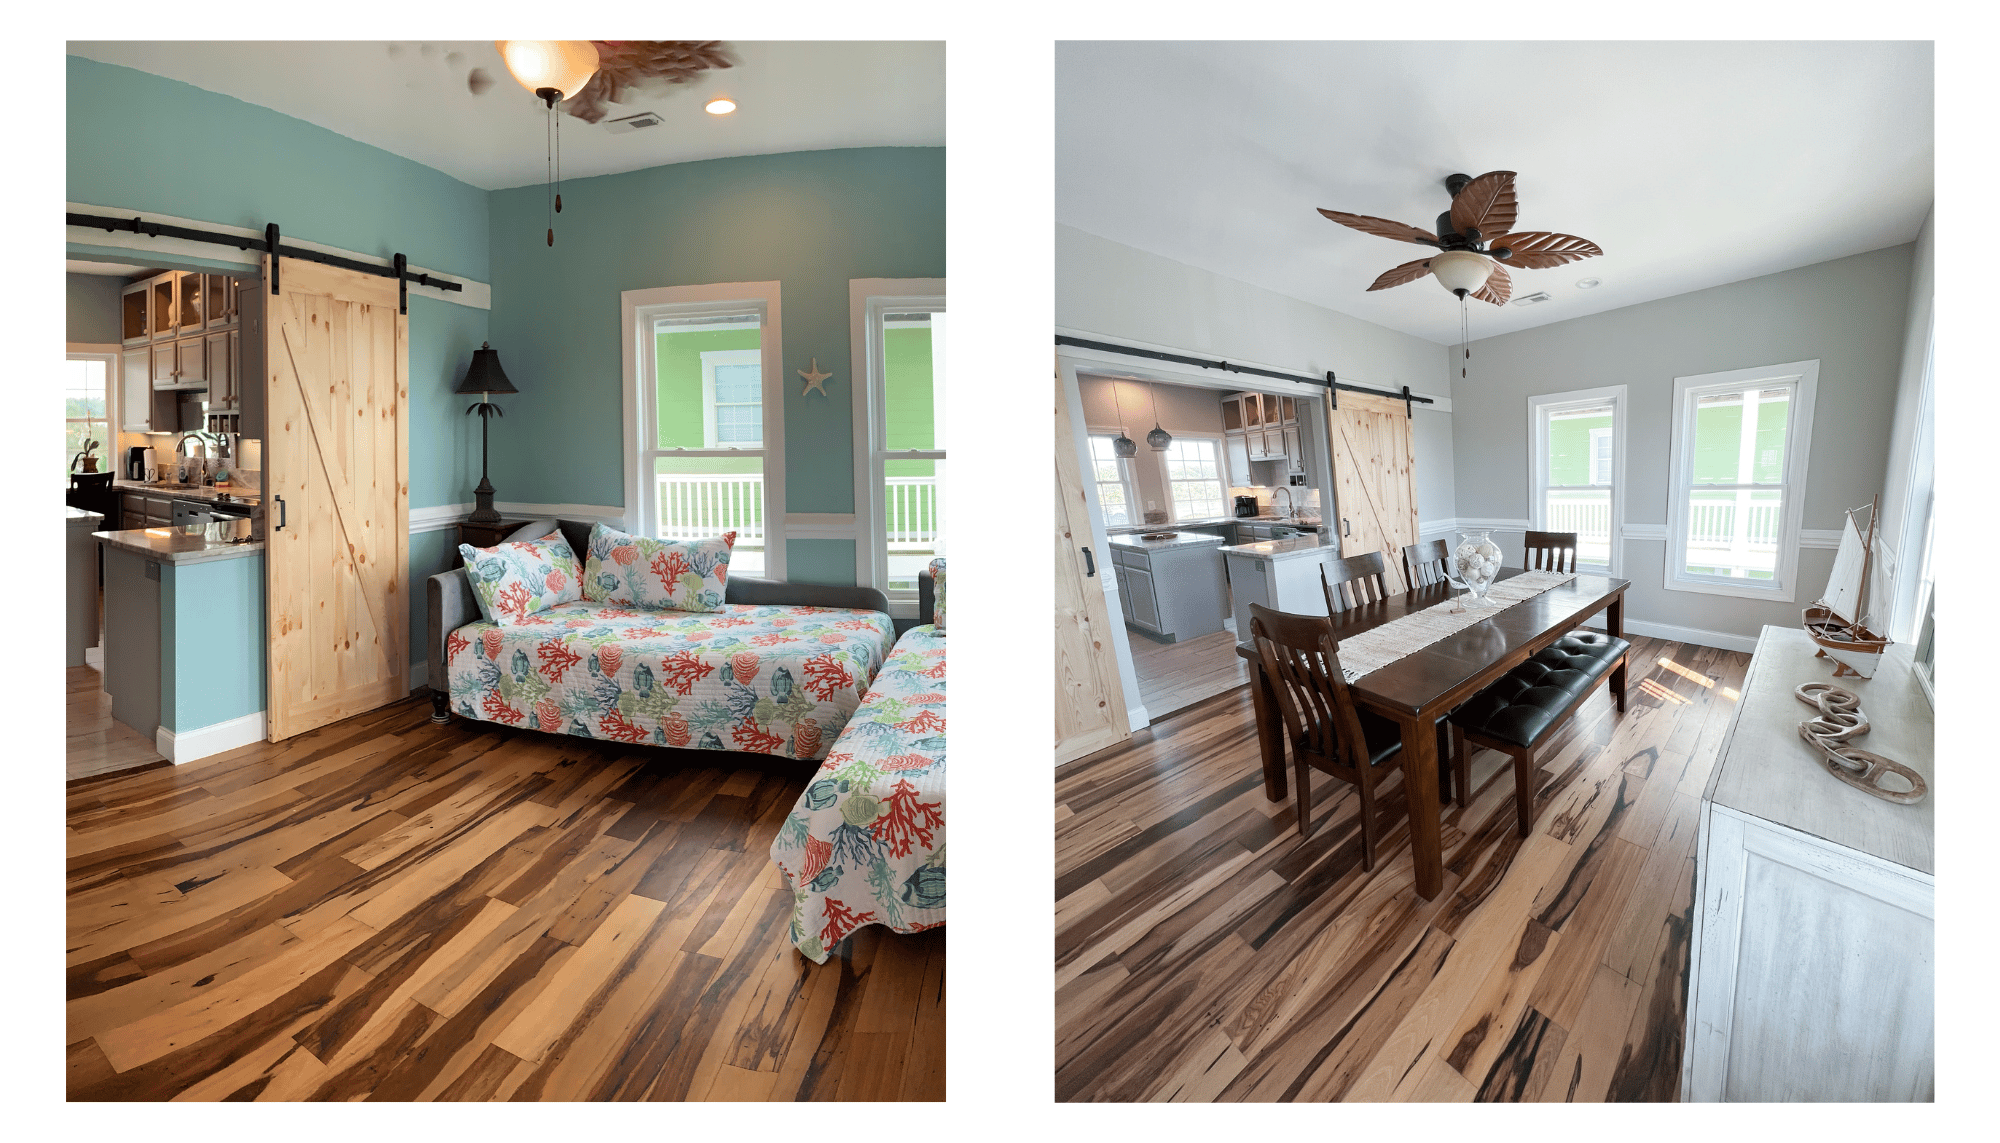 Dining room transformation, Anchors Awey Ocean Isle Beach Before and After, Beach House flip, Ocean isle beach, NC vacation rental, Stilettos and Diapers